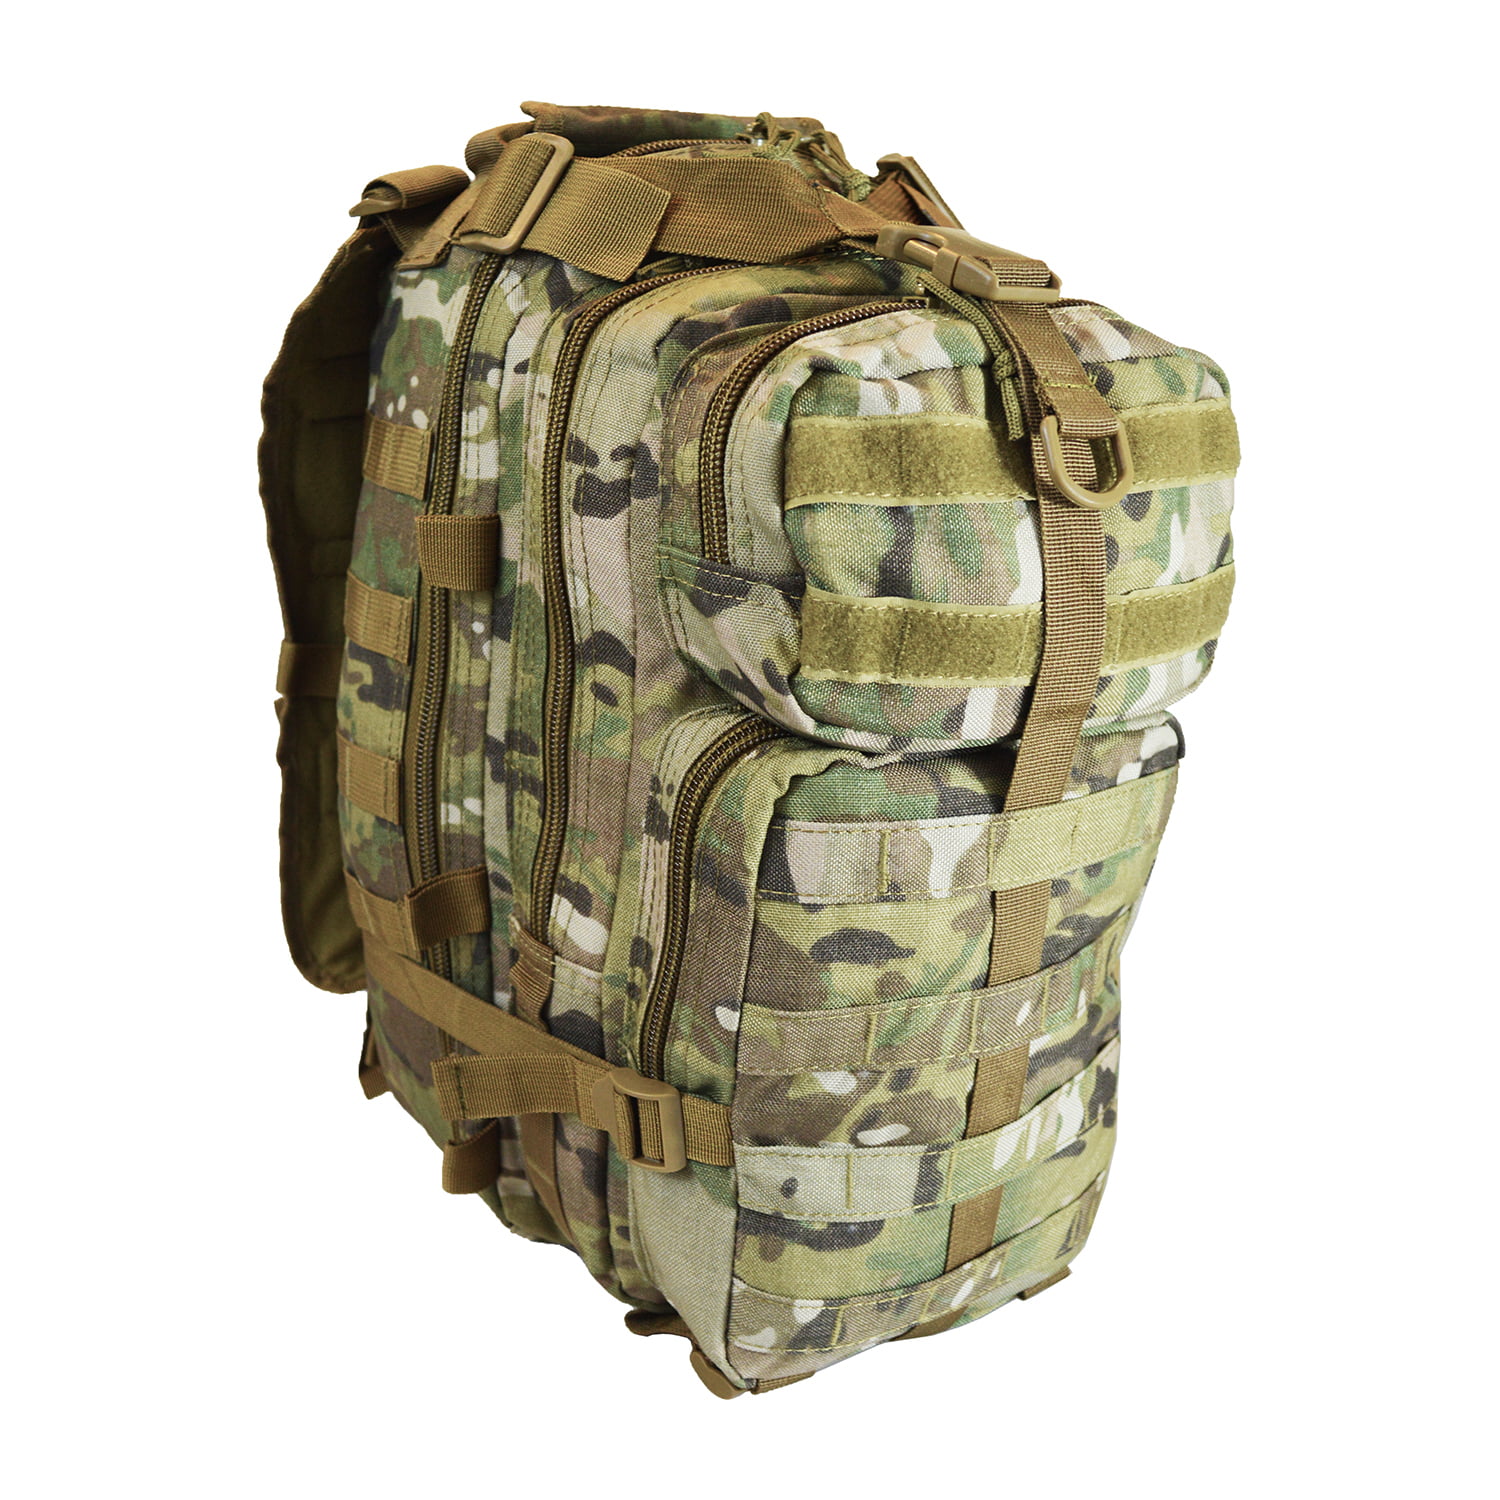 Military Army Tactical Hiking Travel Molle MultiCam A TACS Day Backpack Pack 